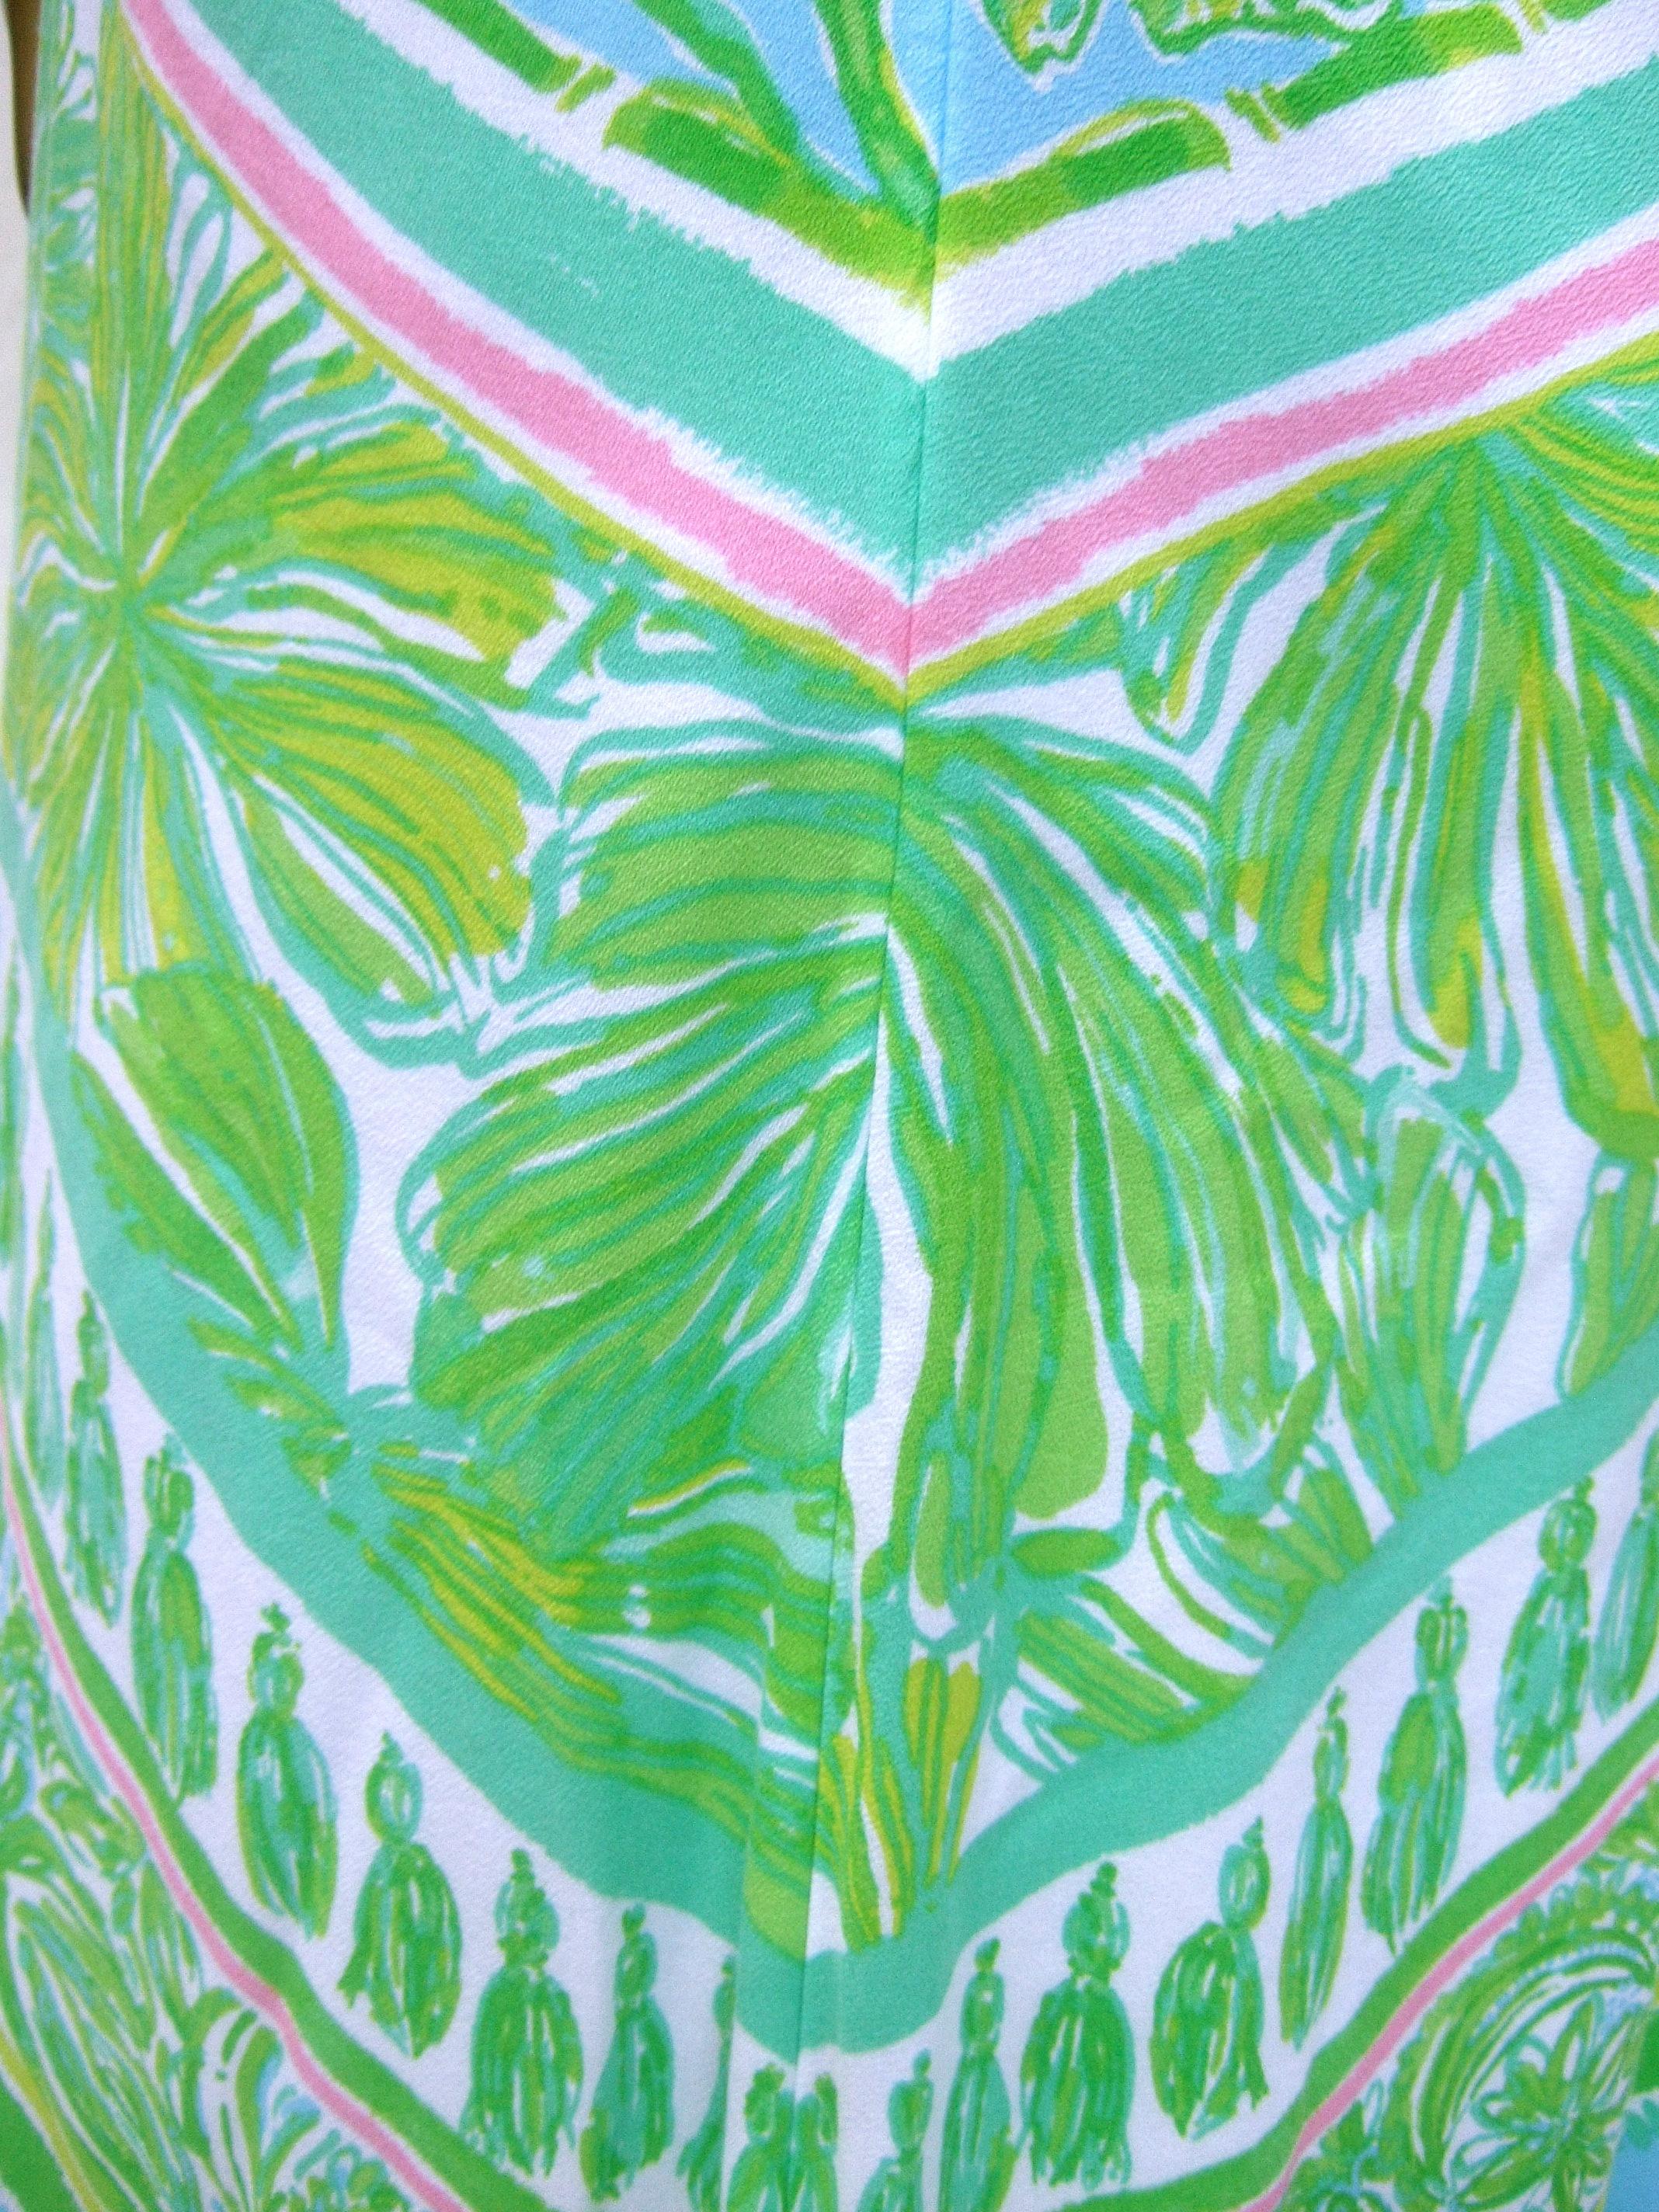 Lilly Pulitzer Vibrant Tropical Print Slip Gown c 1990s 1